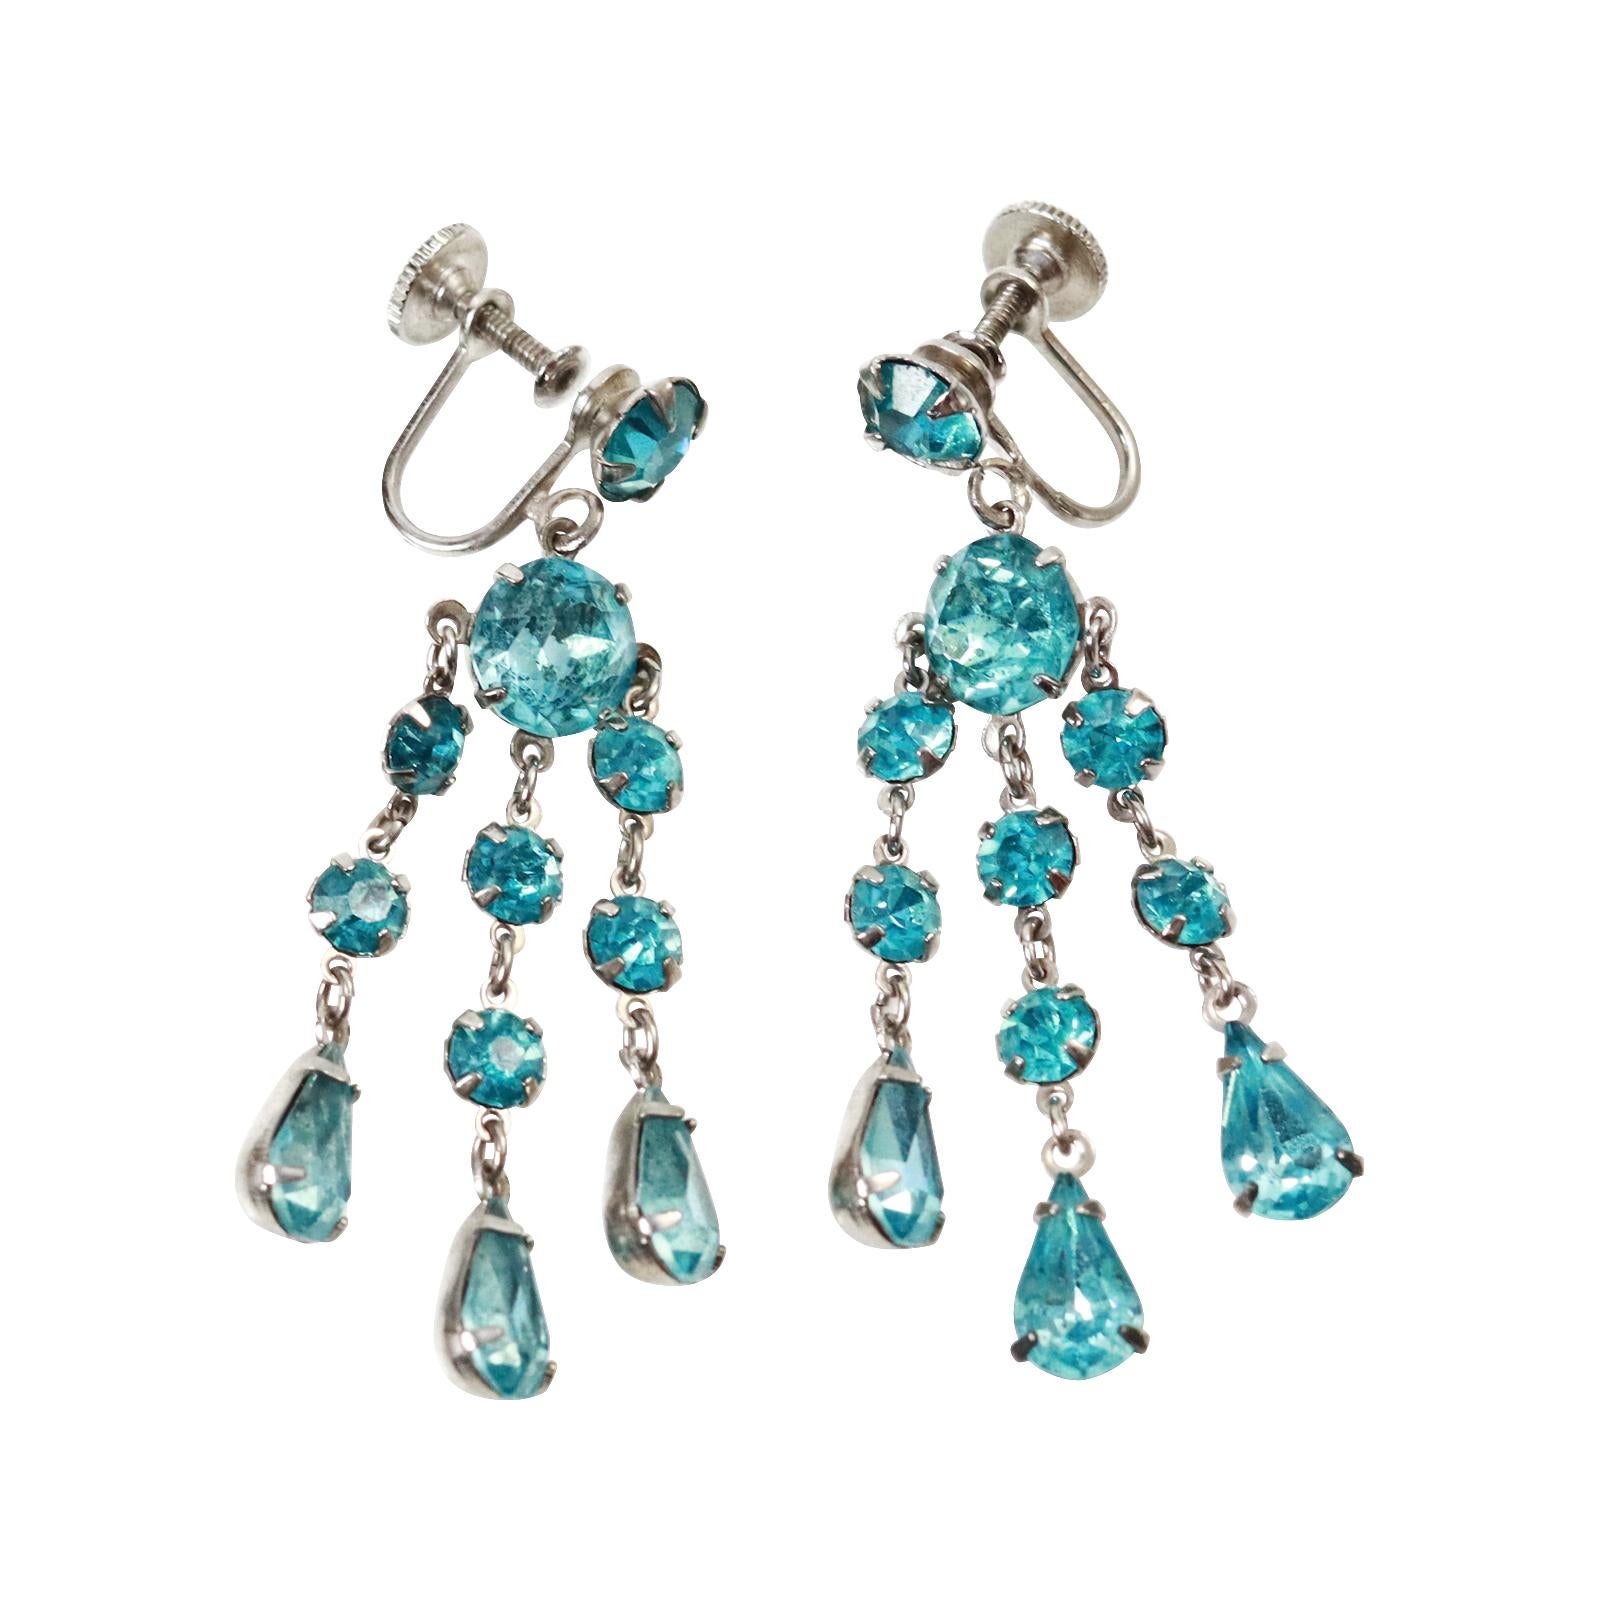 Vintage Wiesner Round and Pear Dangling Earrings circa 1960s.  These beautiful Blue Green dangling chandelier earrings with the unusual color that could morph into many shades has such a chic look and is in such great shape for almost 60 years old. 